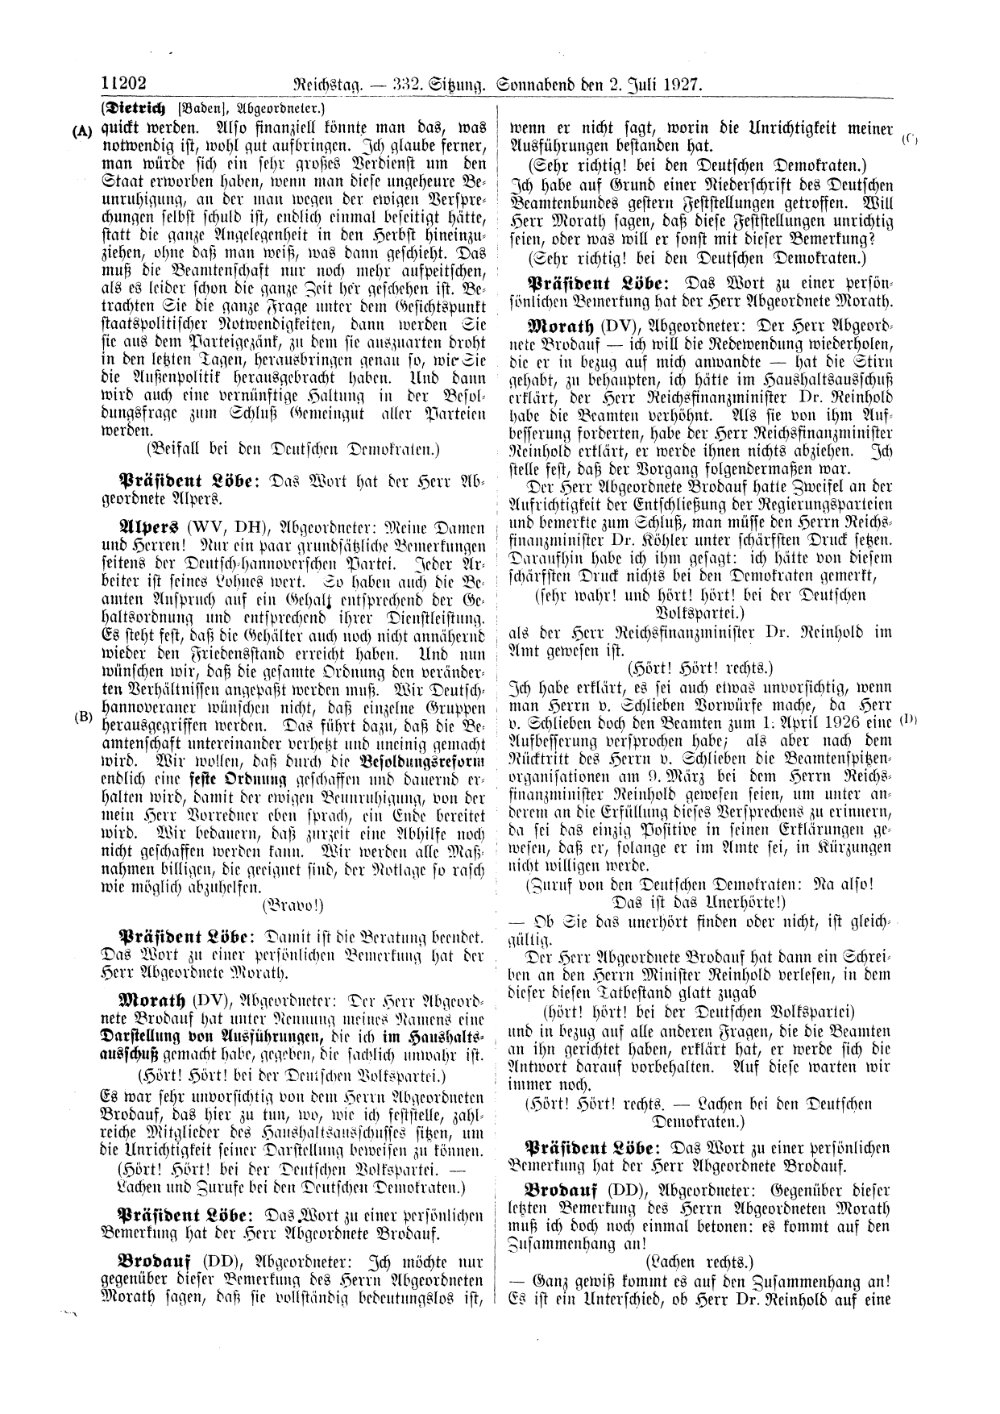 Scan of page 11202